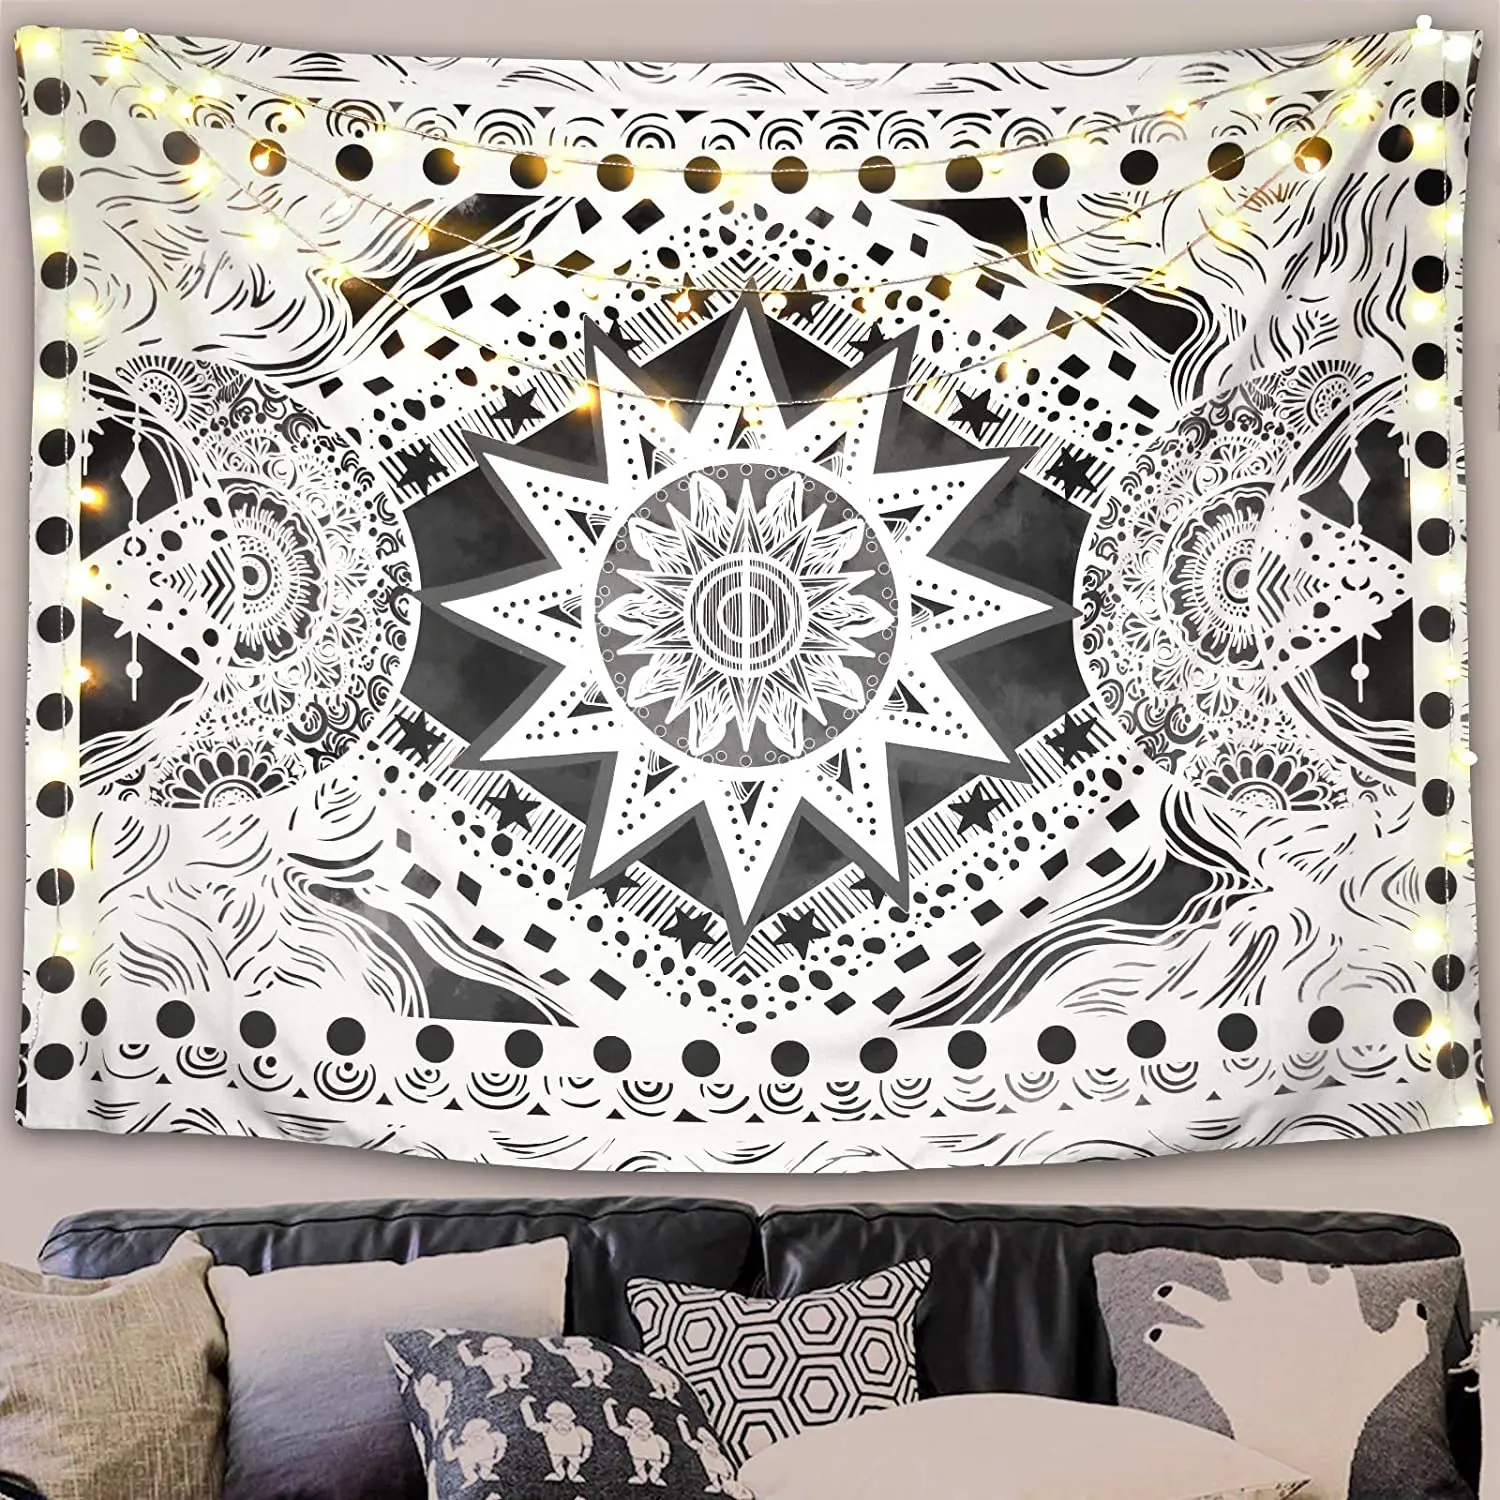 

Grey Sun and Moon Color Hippie Mandala Tapestry Background Wall Covering Home Decoration Blanket Bedroom Wall Hanging Tapestries